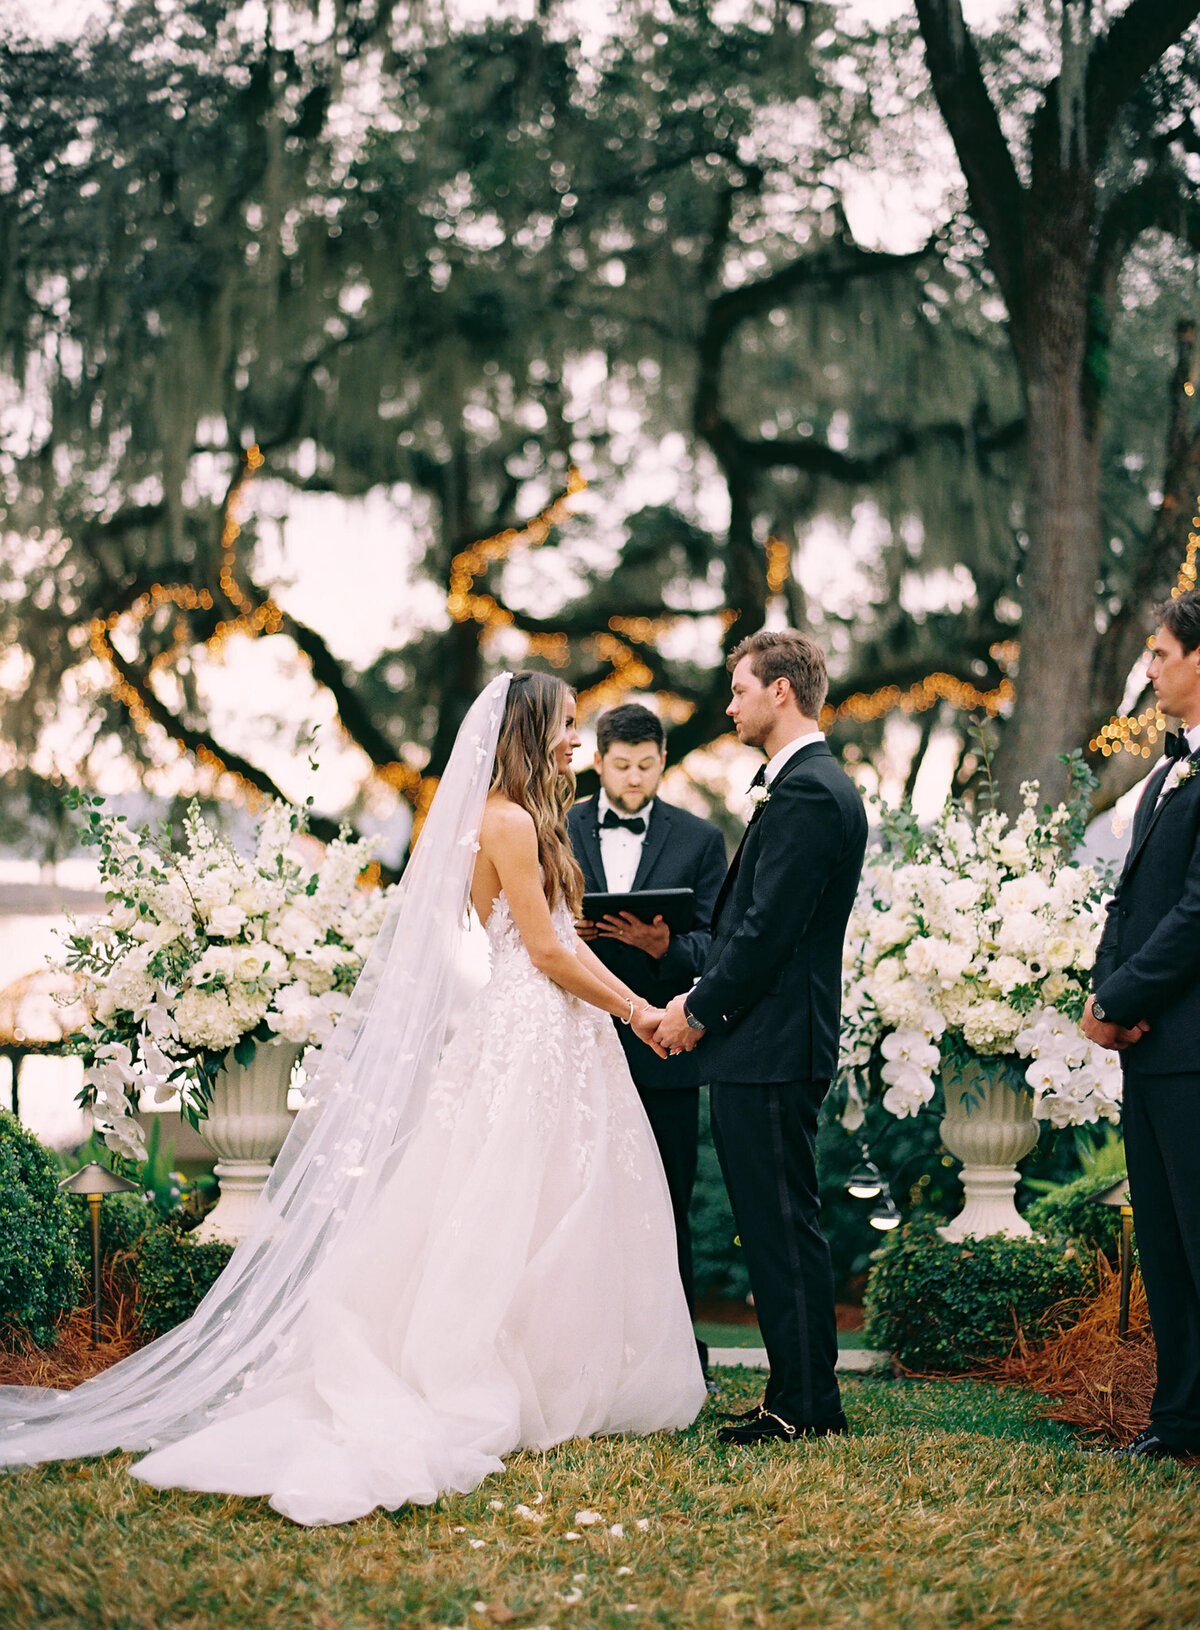 A wedding at a private estate in Tallahassee, FL - 27